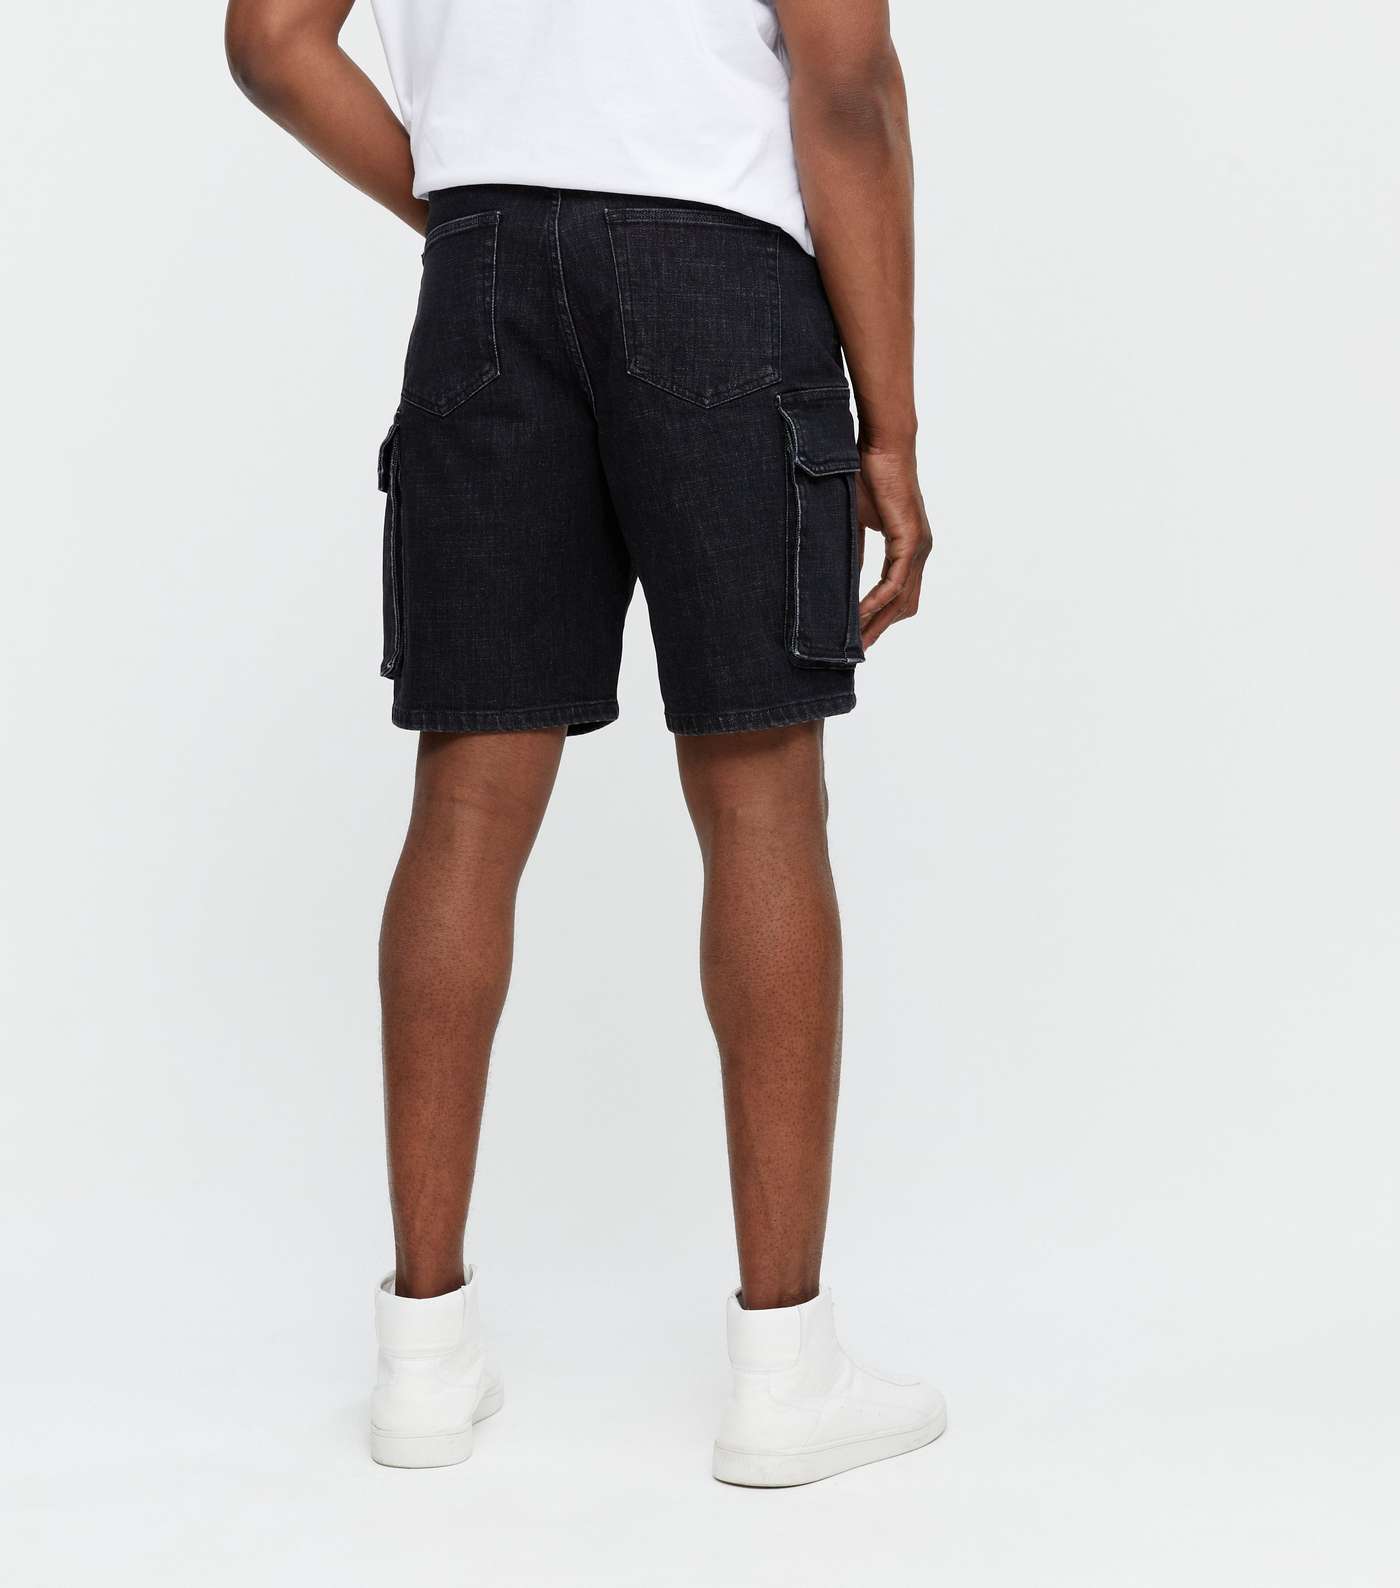 Black Denim Relaxed Fit Cargo Shorts Image 4